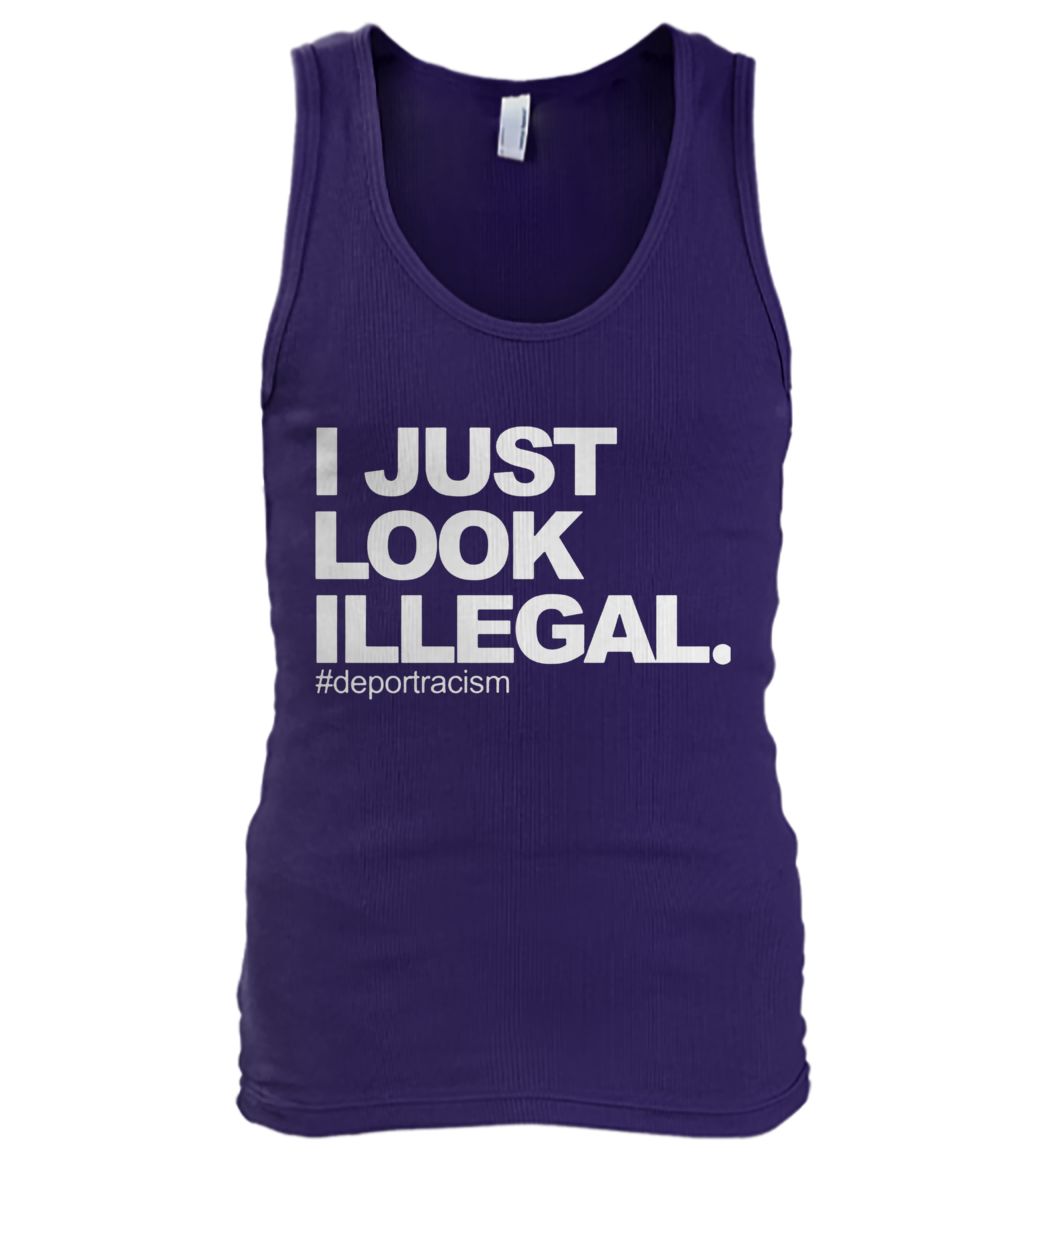 I just look illegal #deportracism tank top